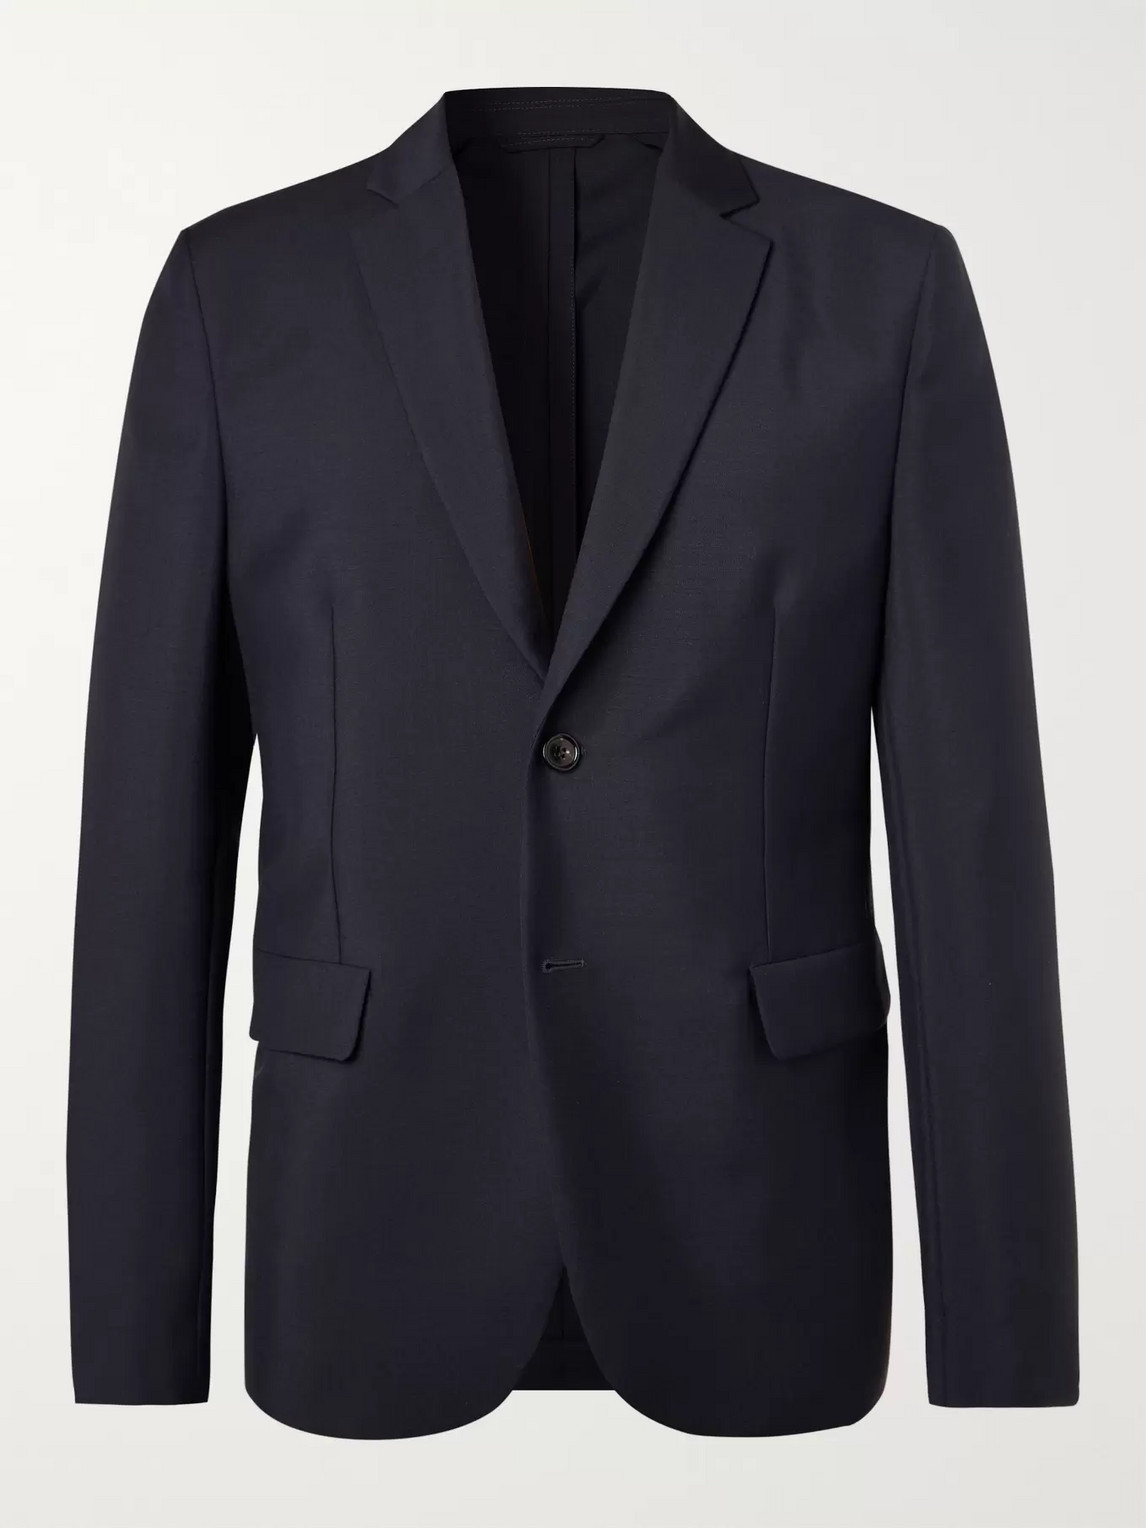 ACNE STUDIOS NAVY UNSTRUCTURED WOOL AND MOHAIR-BLEND BLAZER